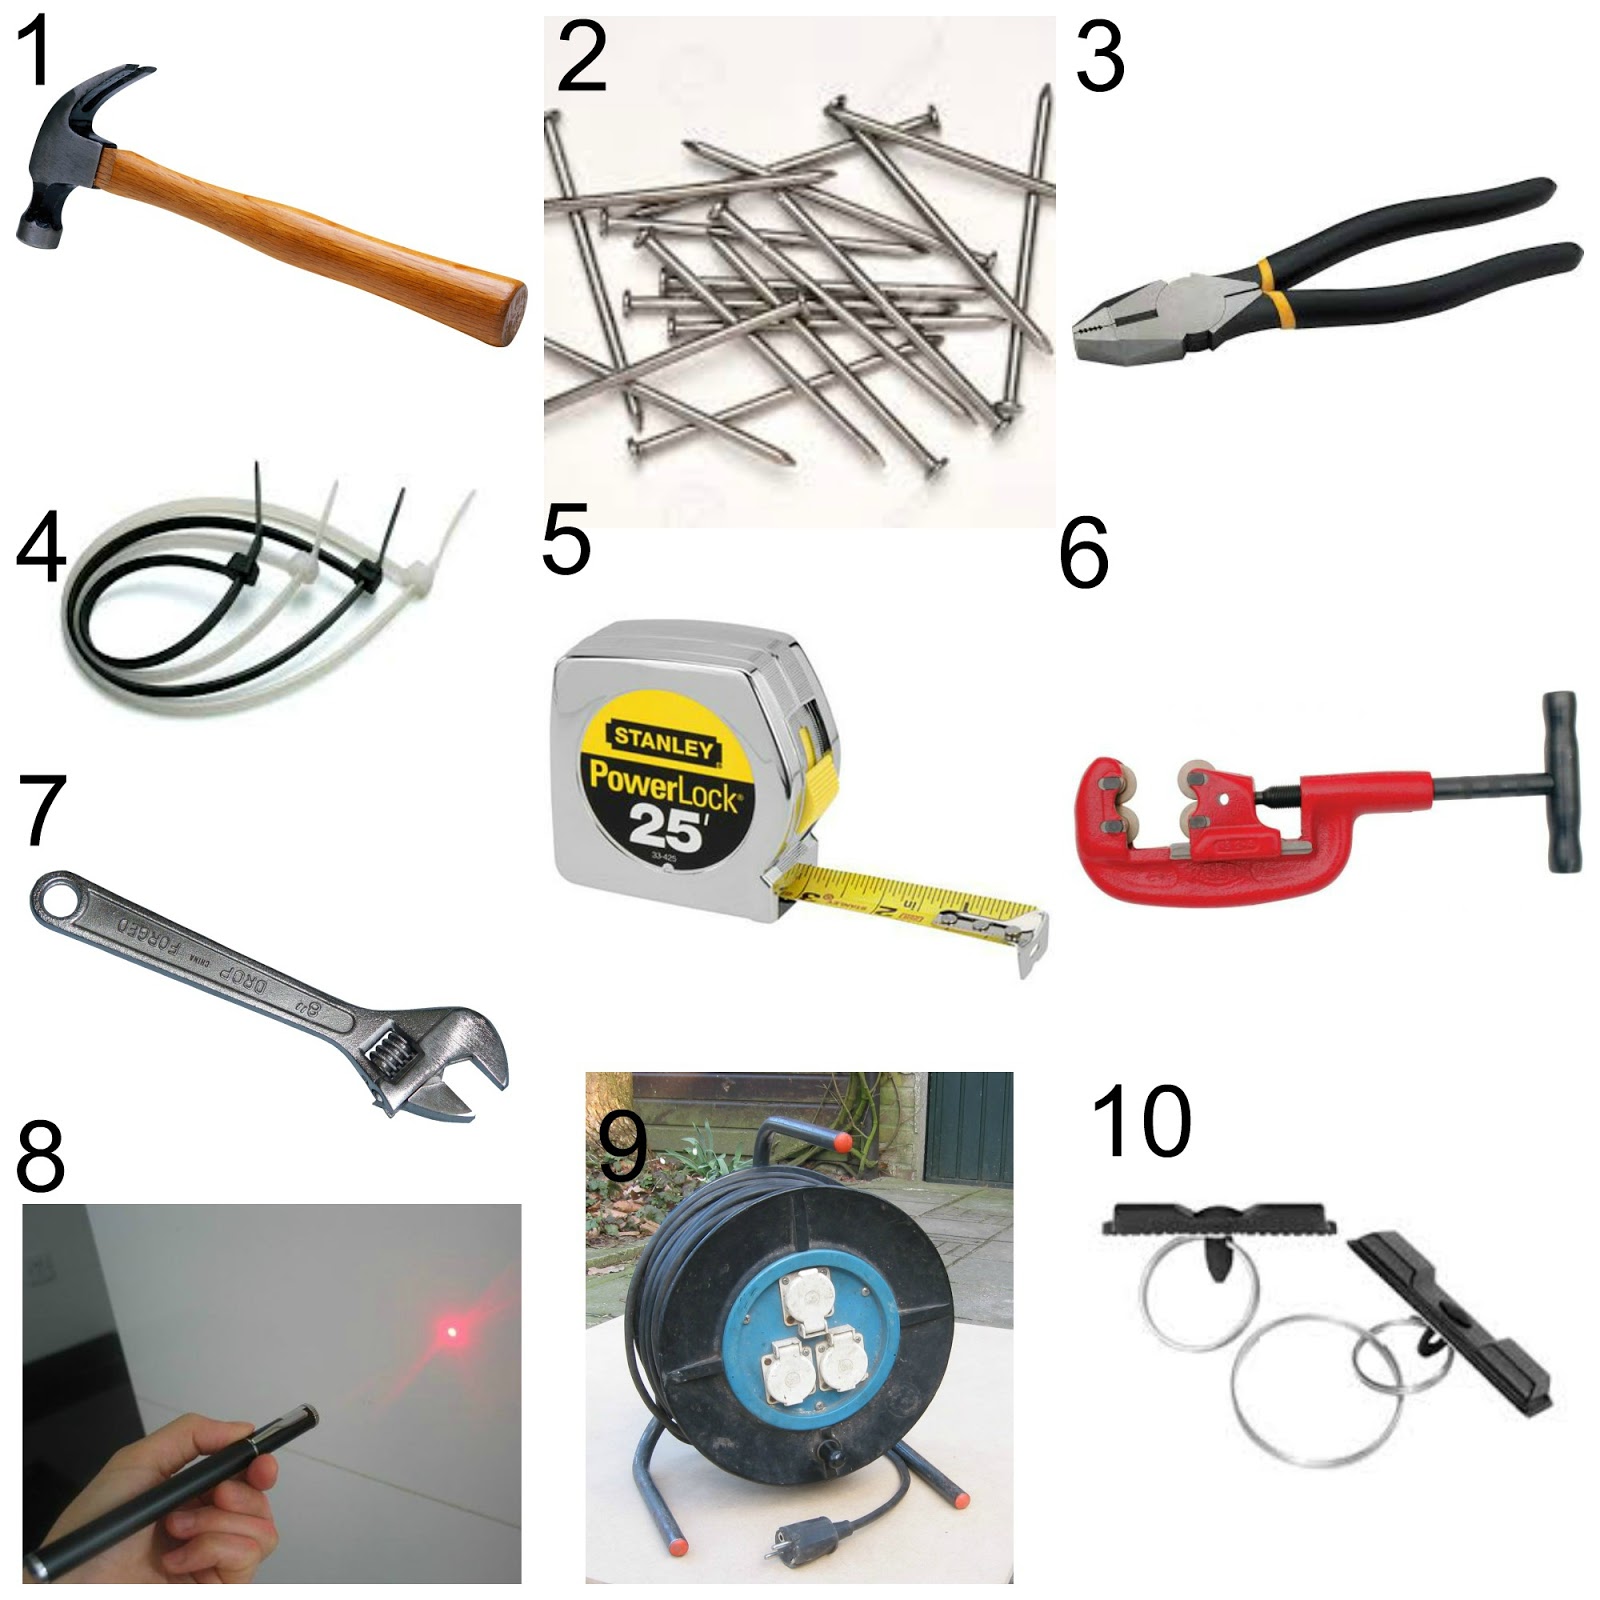 The Very Best Balloon Blog: So what tools should I take with me